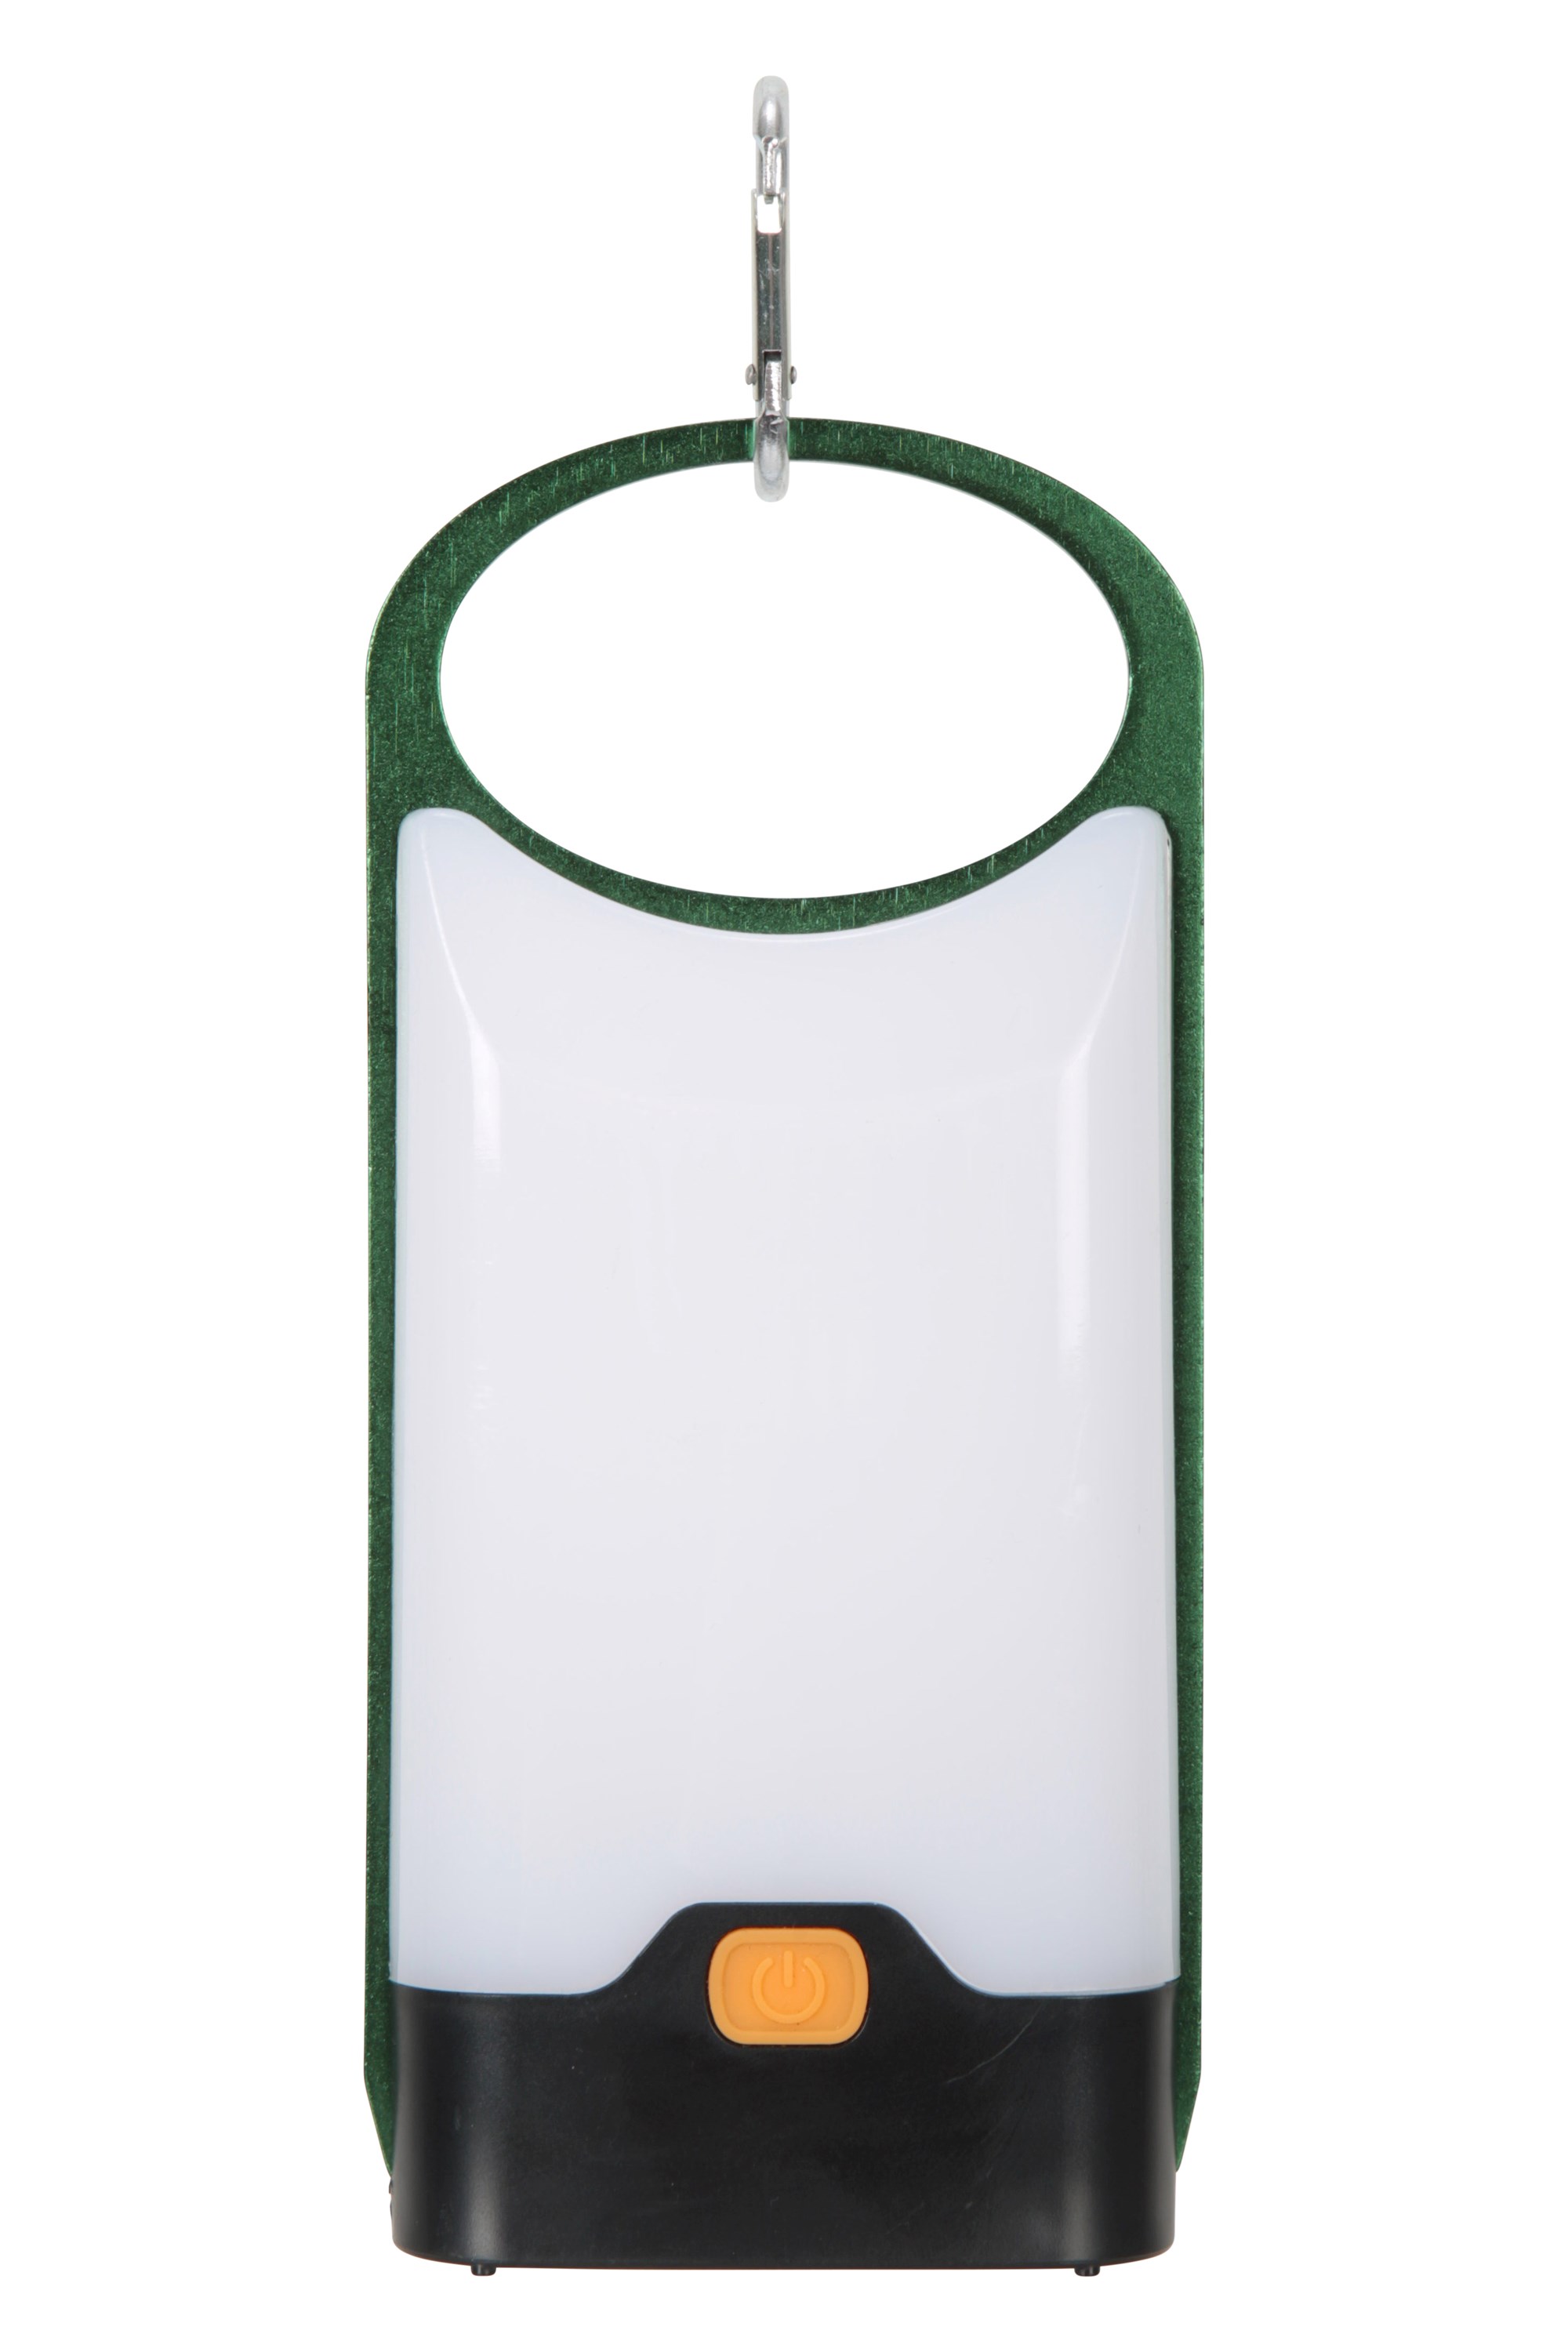 Mountain Warehouse Wind Up Lantern 3 Setting LED Lights Water Resistant 